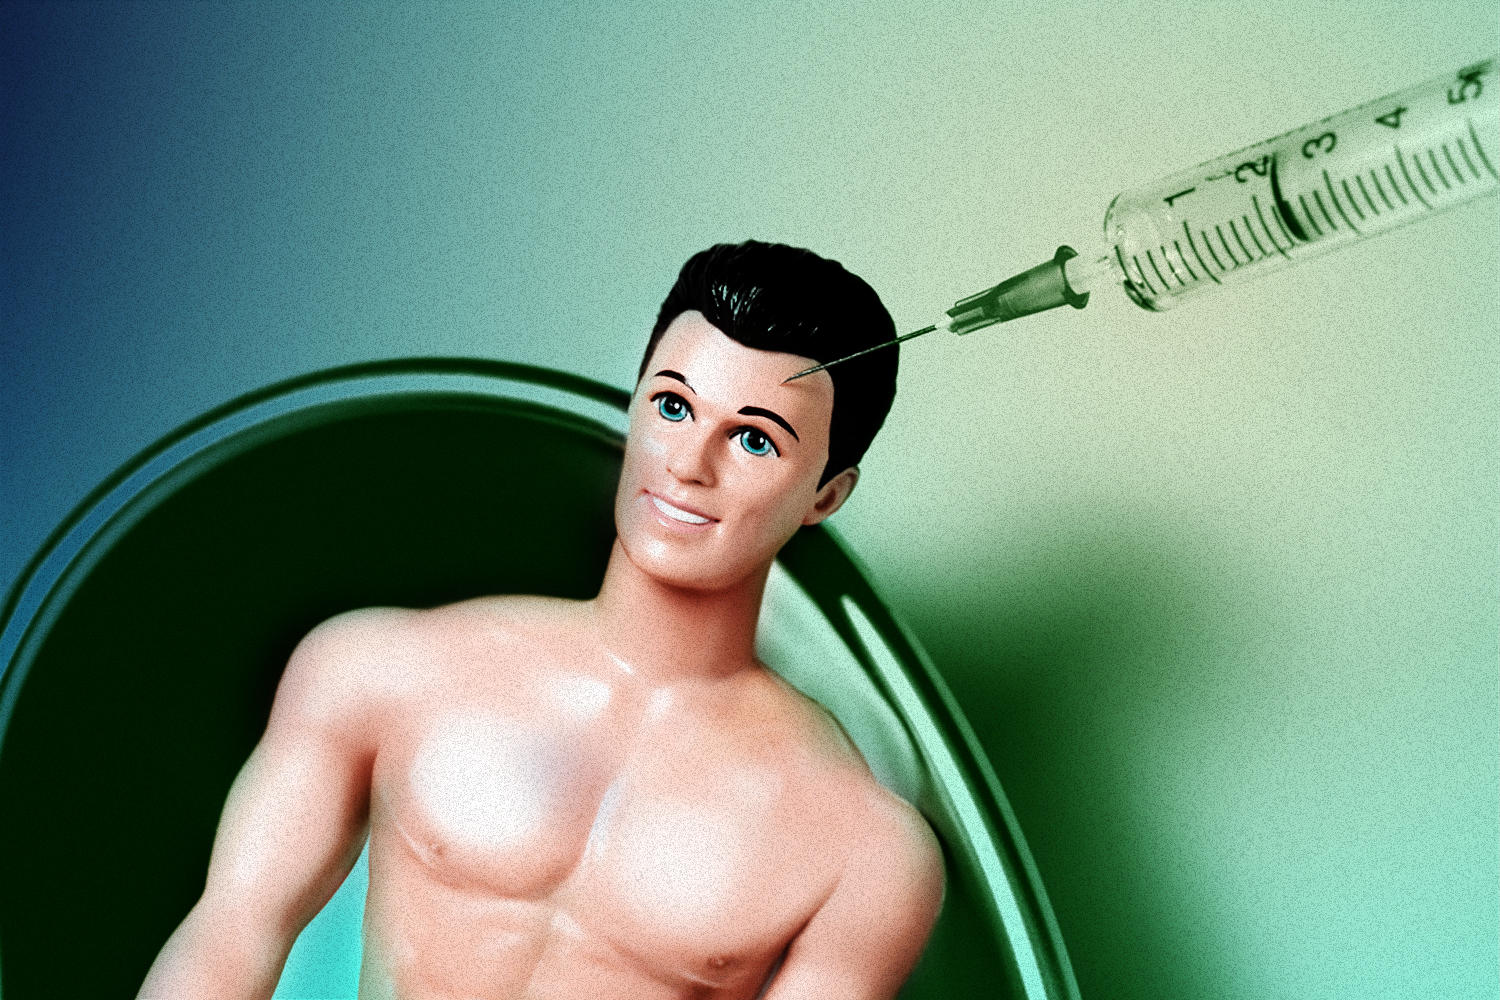 More Men Are Getting Botox. Should You?